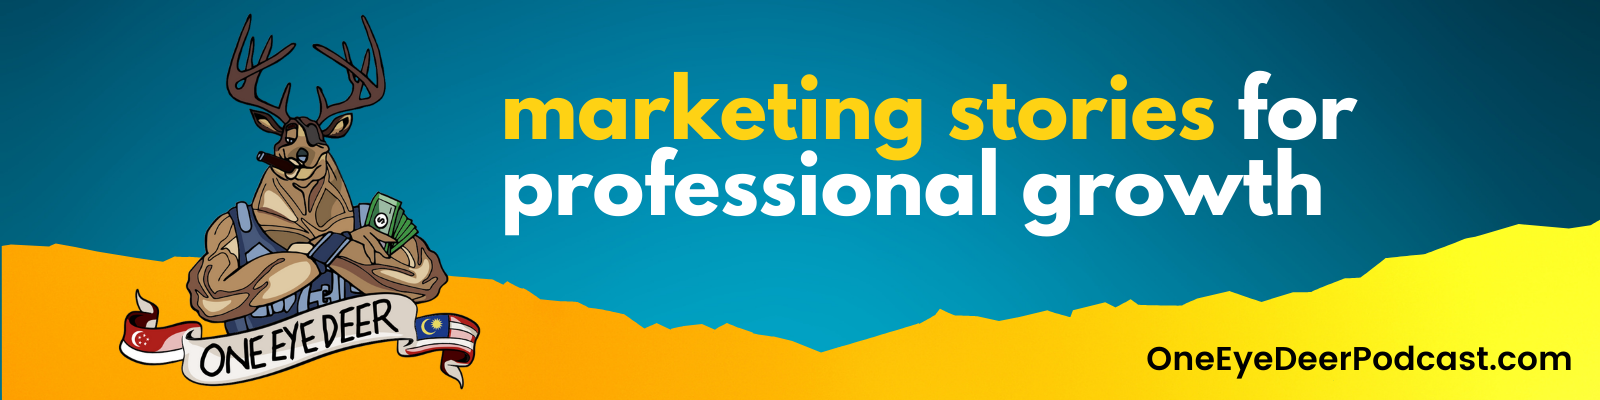 One Eye Deer: Marketing Stories for Professional Growth